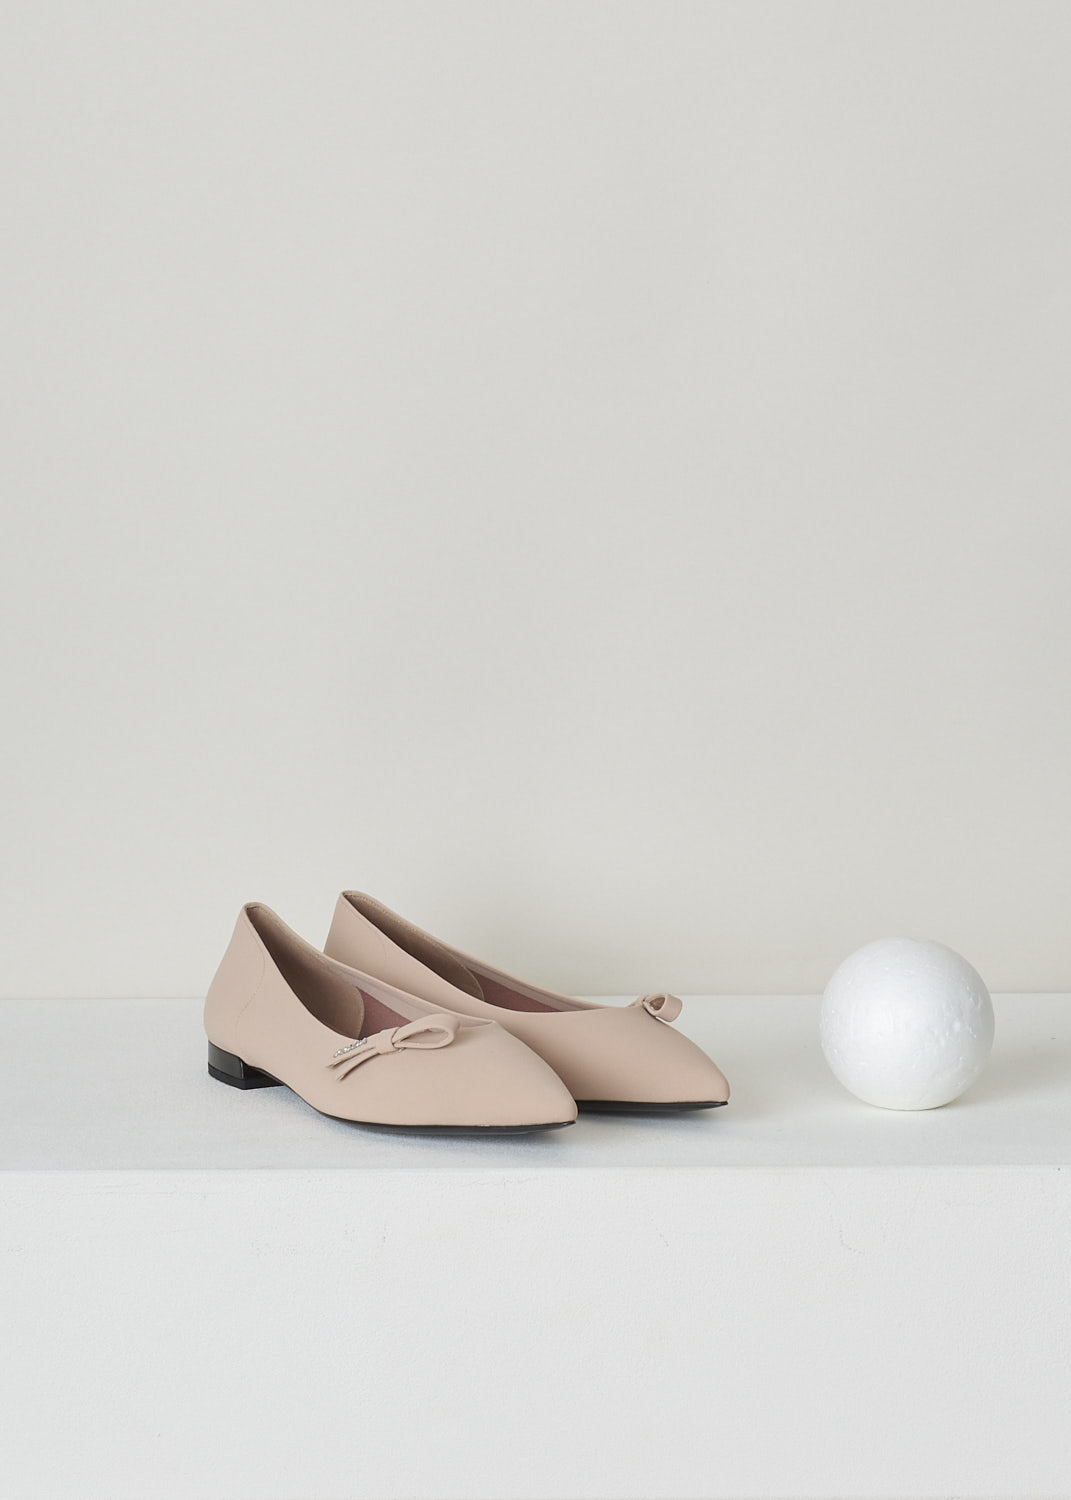 PRADA, NUDE BALLET FLATS WITH POINTED TOE, TESSUTO_TECH_1F273L_3KQ6_F0A48_NUDO, Pink, Front, Side, These nude colored ballet flats have a pointed toe with, along the topline, a bow with the brand's name in silver-toned letters. These slip-in flats have a small heel. 
